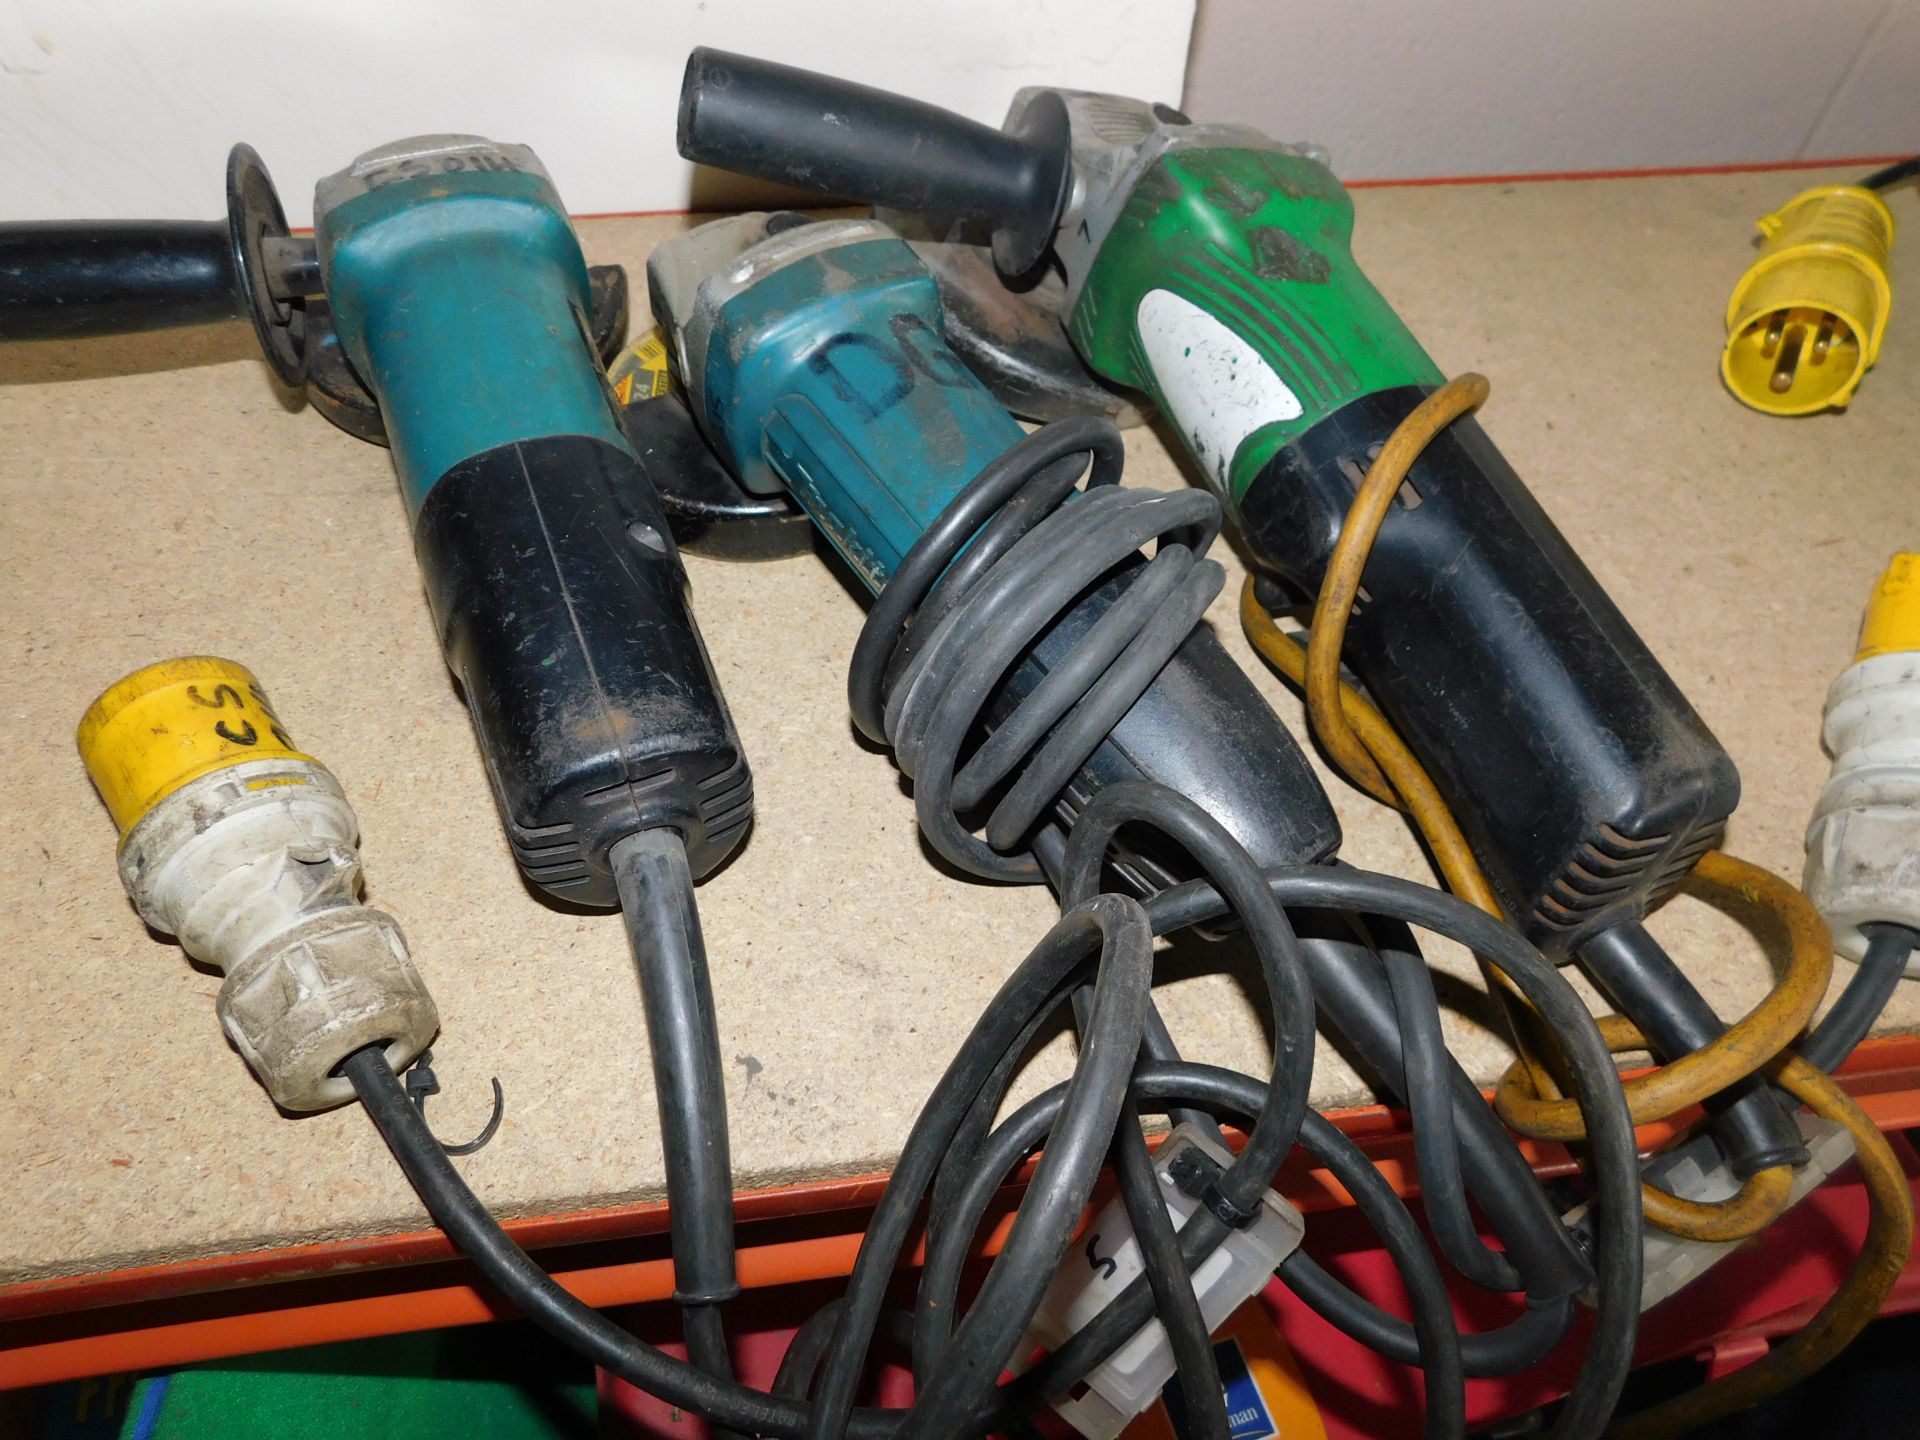 2 Makita & Hitachi Angle Grinders (Location: Stockport. Please Refer to General Notes)